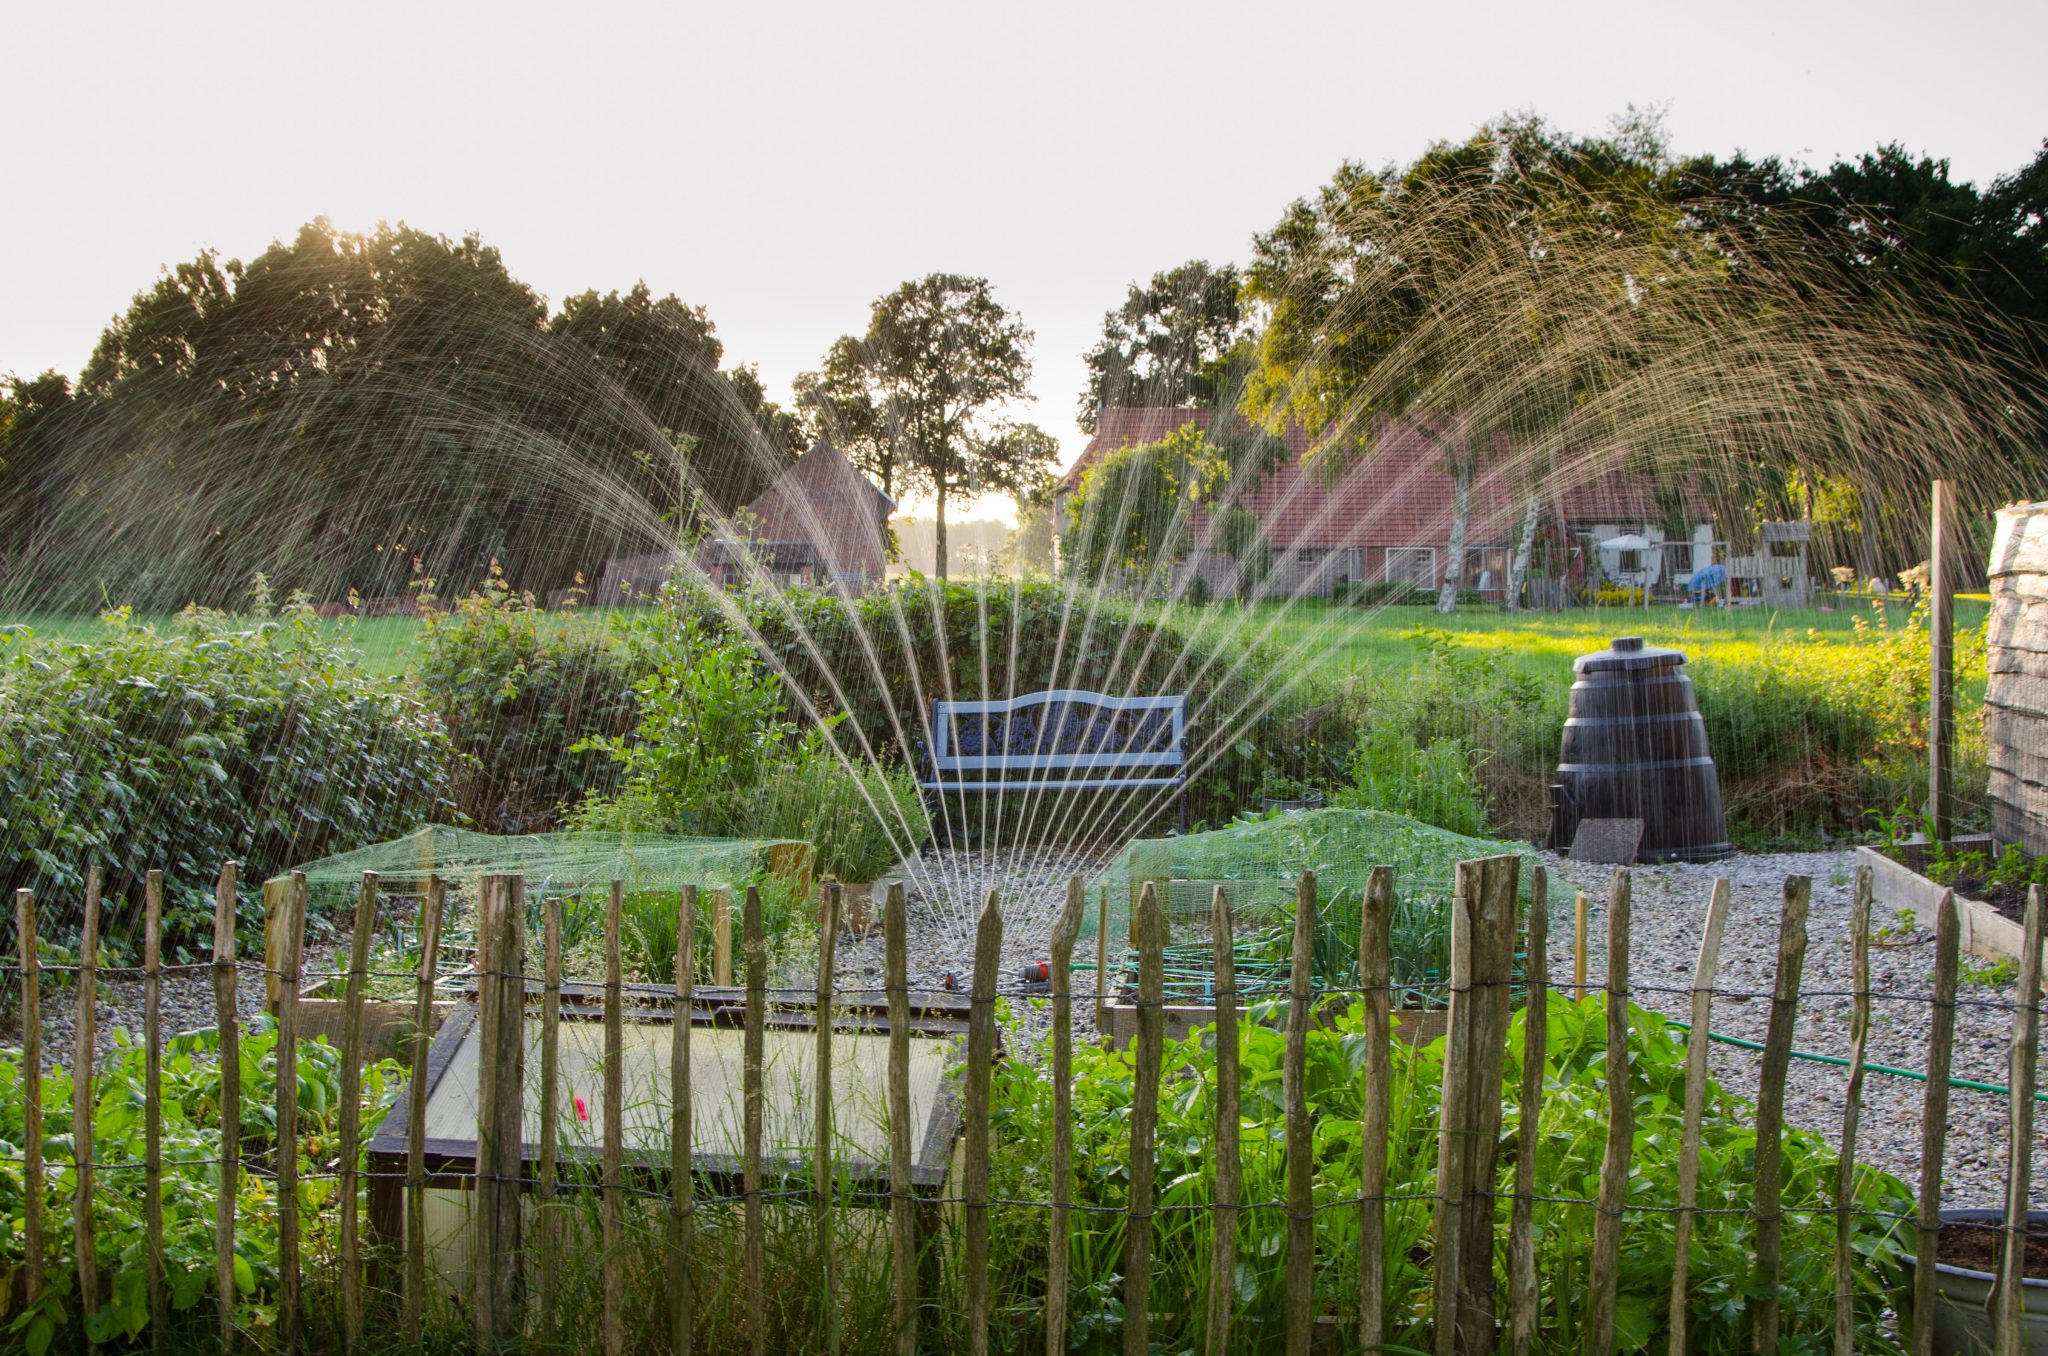 Check out these conversation tips to save water when watering your lawn!